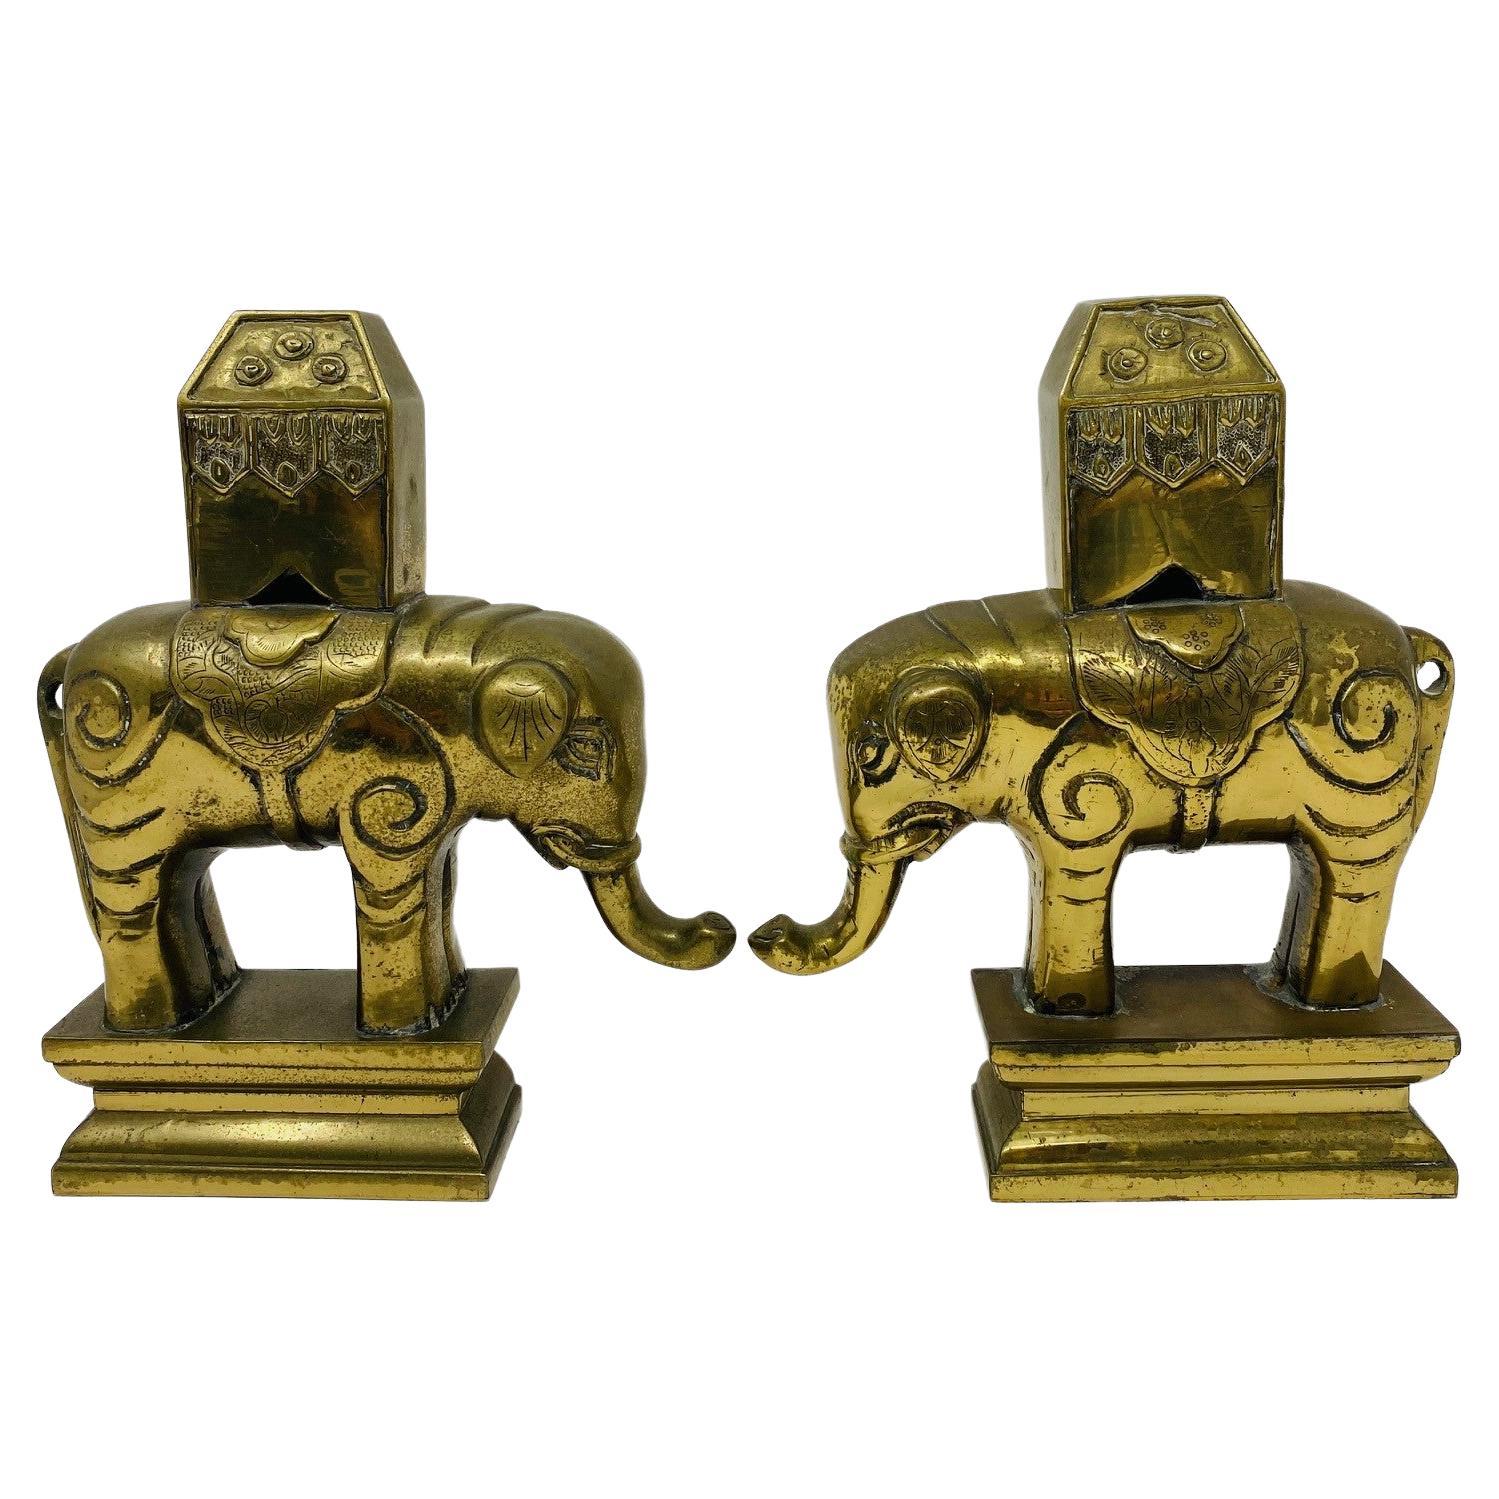 Vintage 1940s Pair of Sculptural Elephant Bookends in Solid Brass